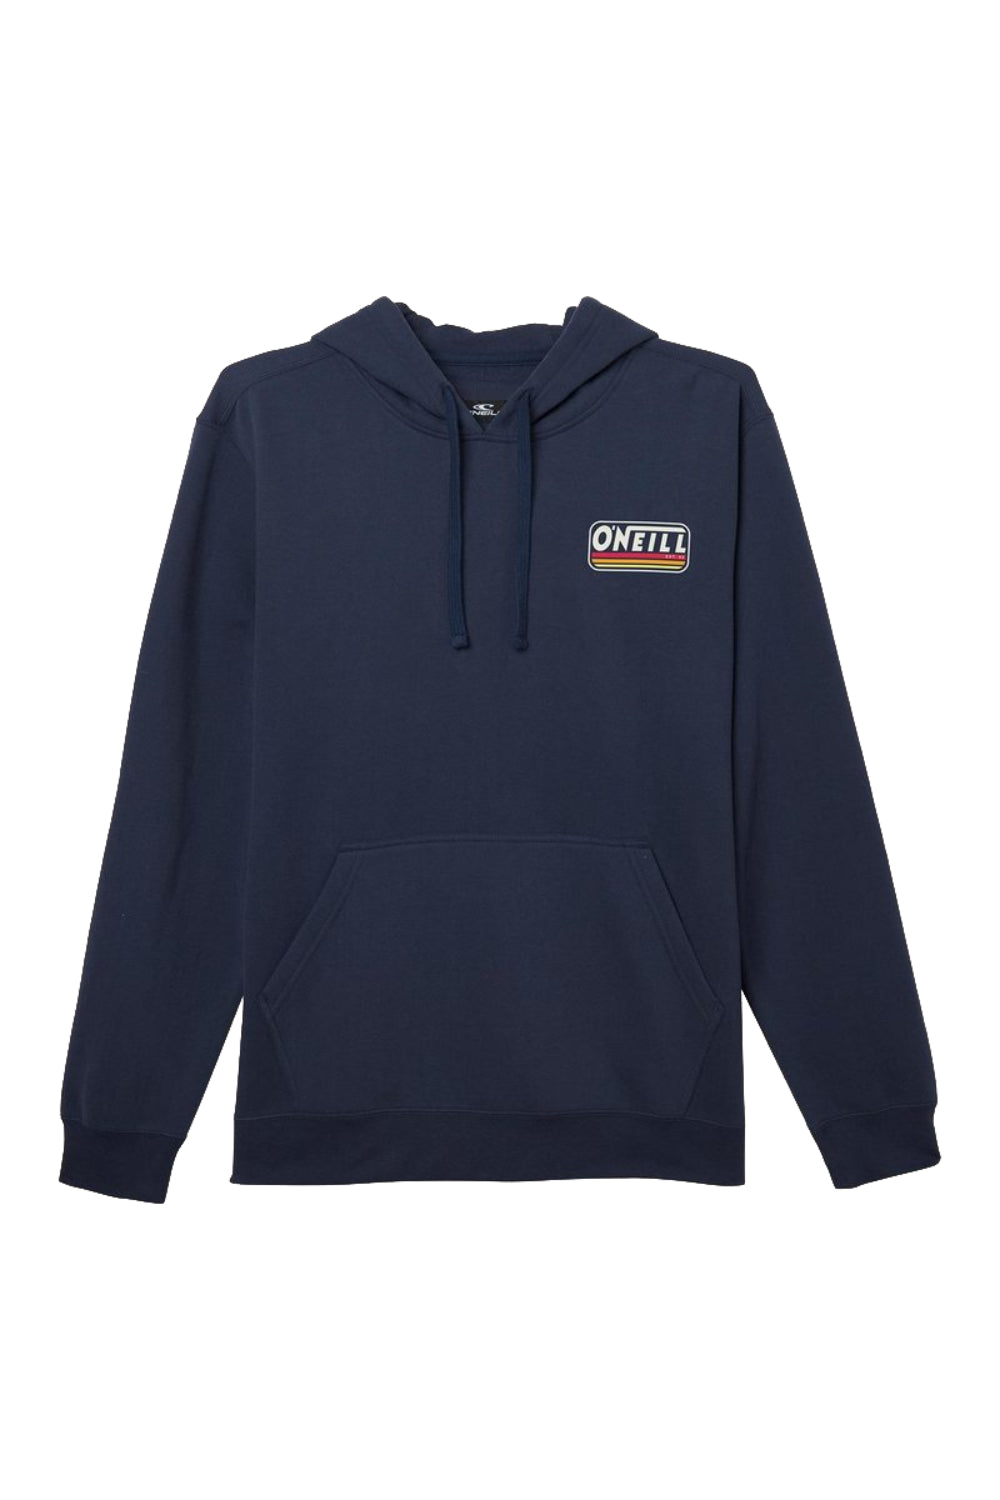 Oneill Fifty Two Pullover Fleece NVY2 L